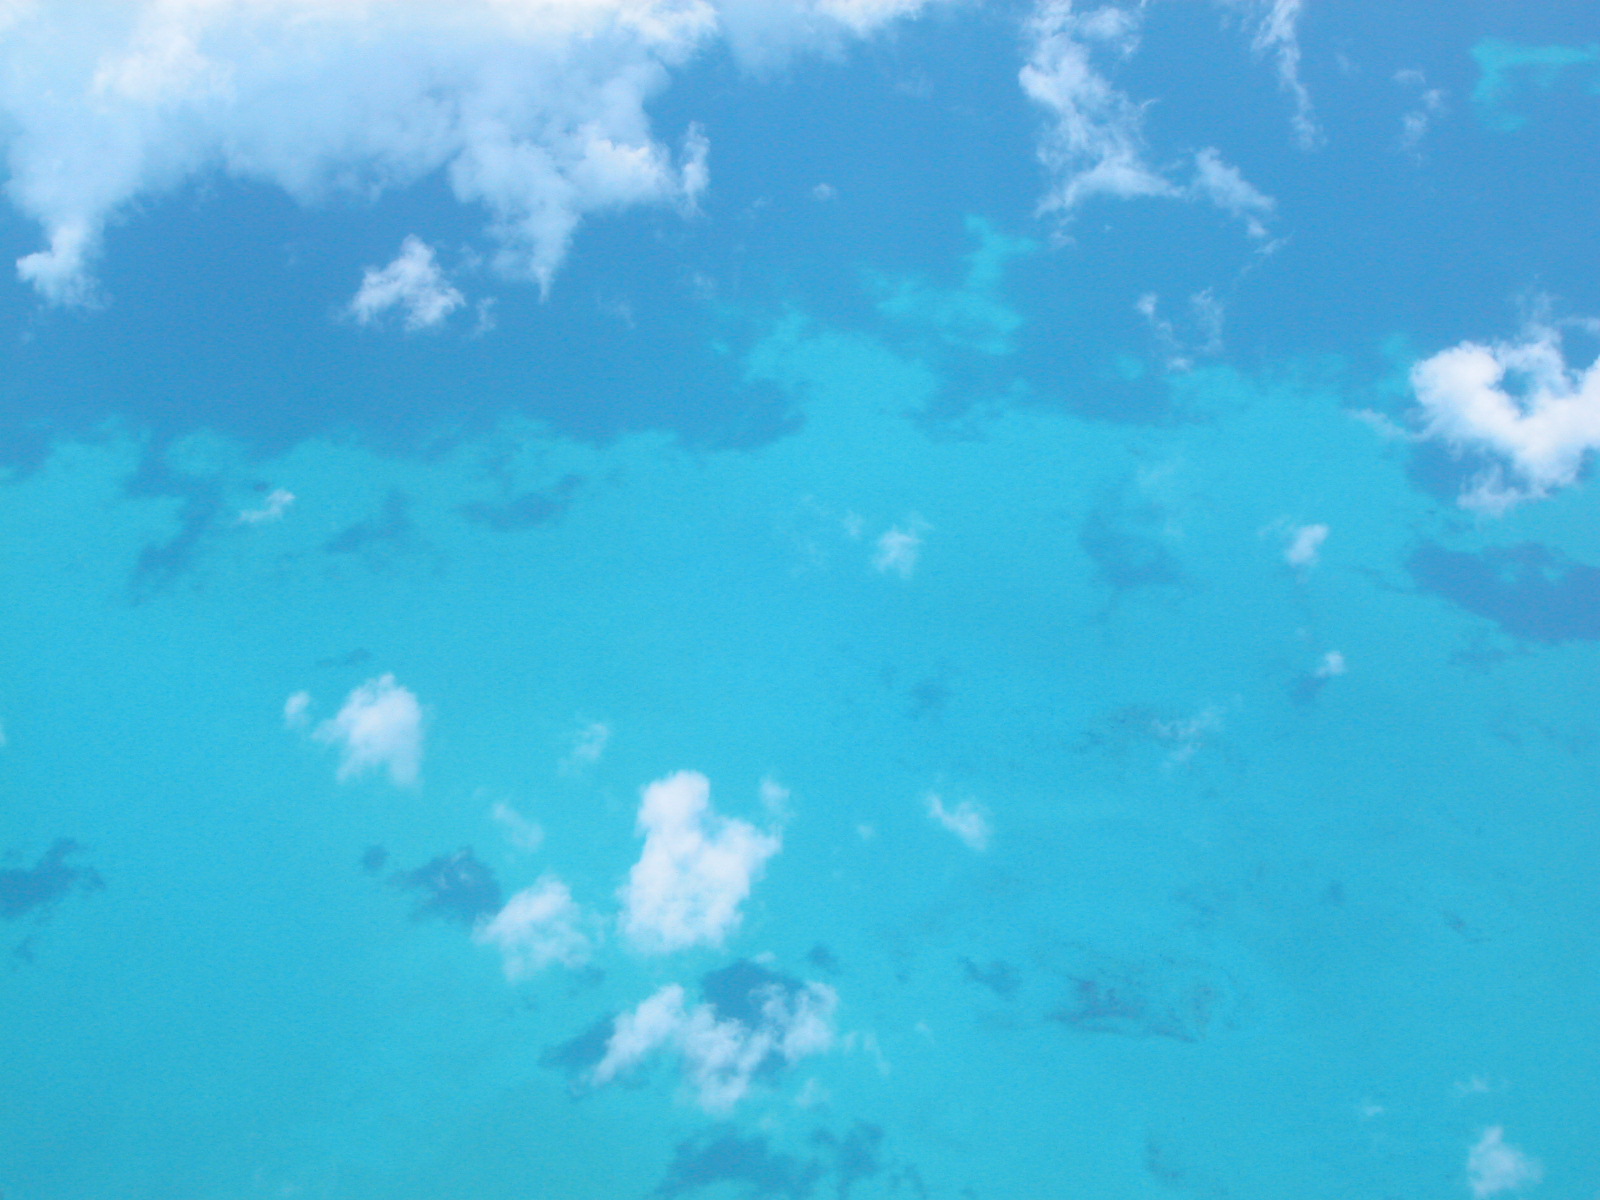 sea lagoon blue from the sky high-up bedding seabedding bottom texture